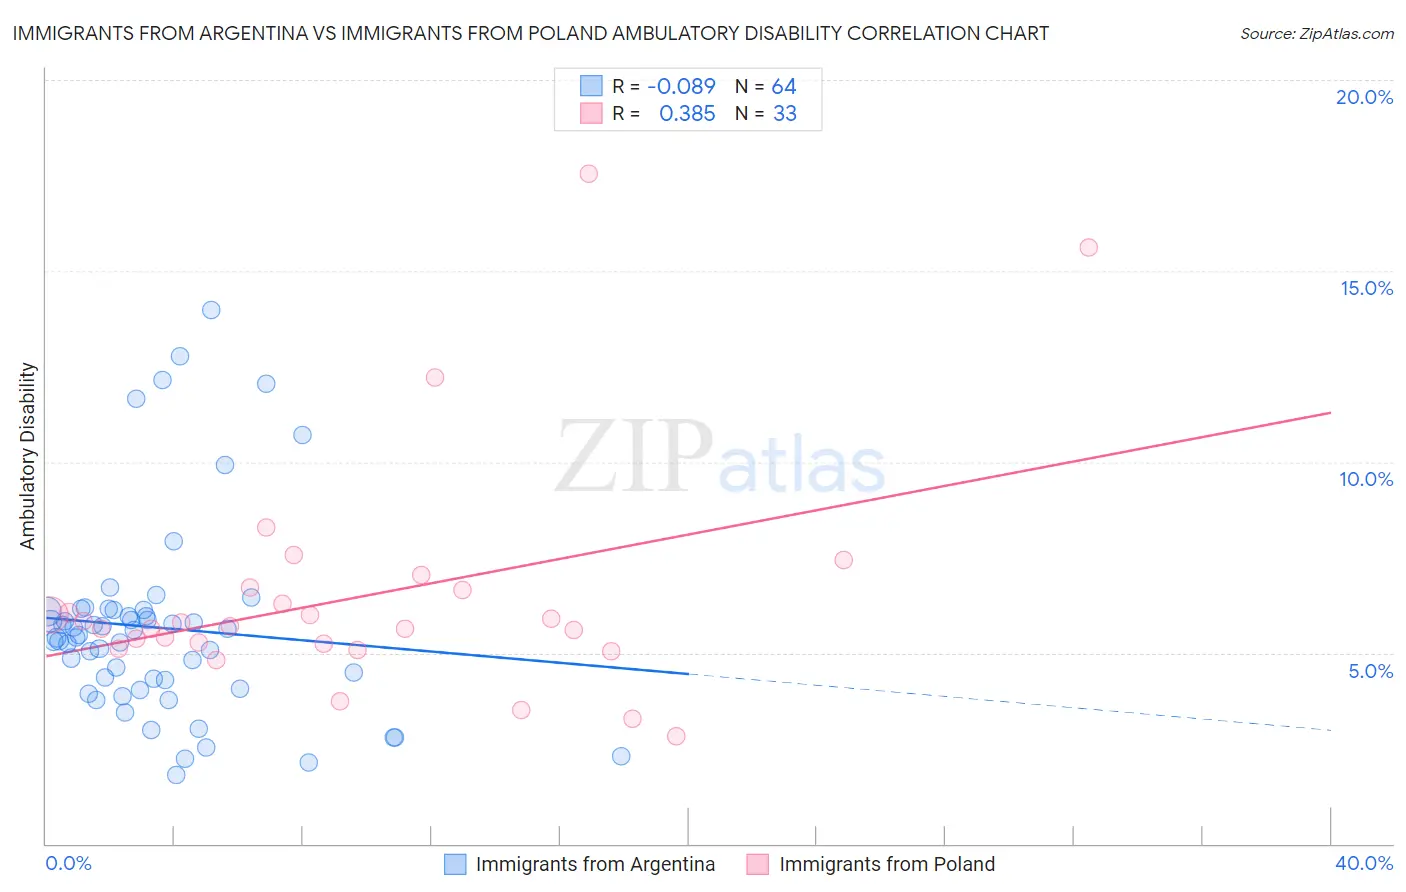 Immigrants from Argentina vs Immigrants from Poland Ambulatory Disability